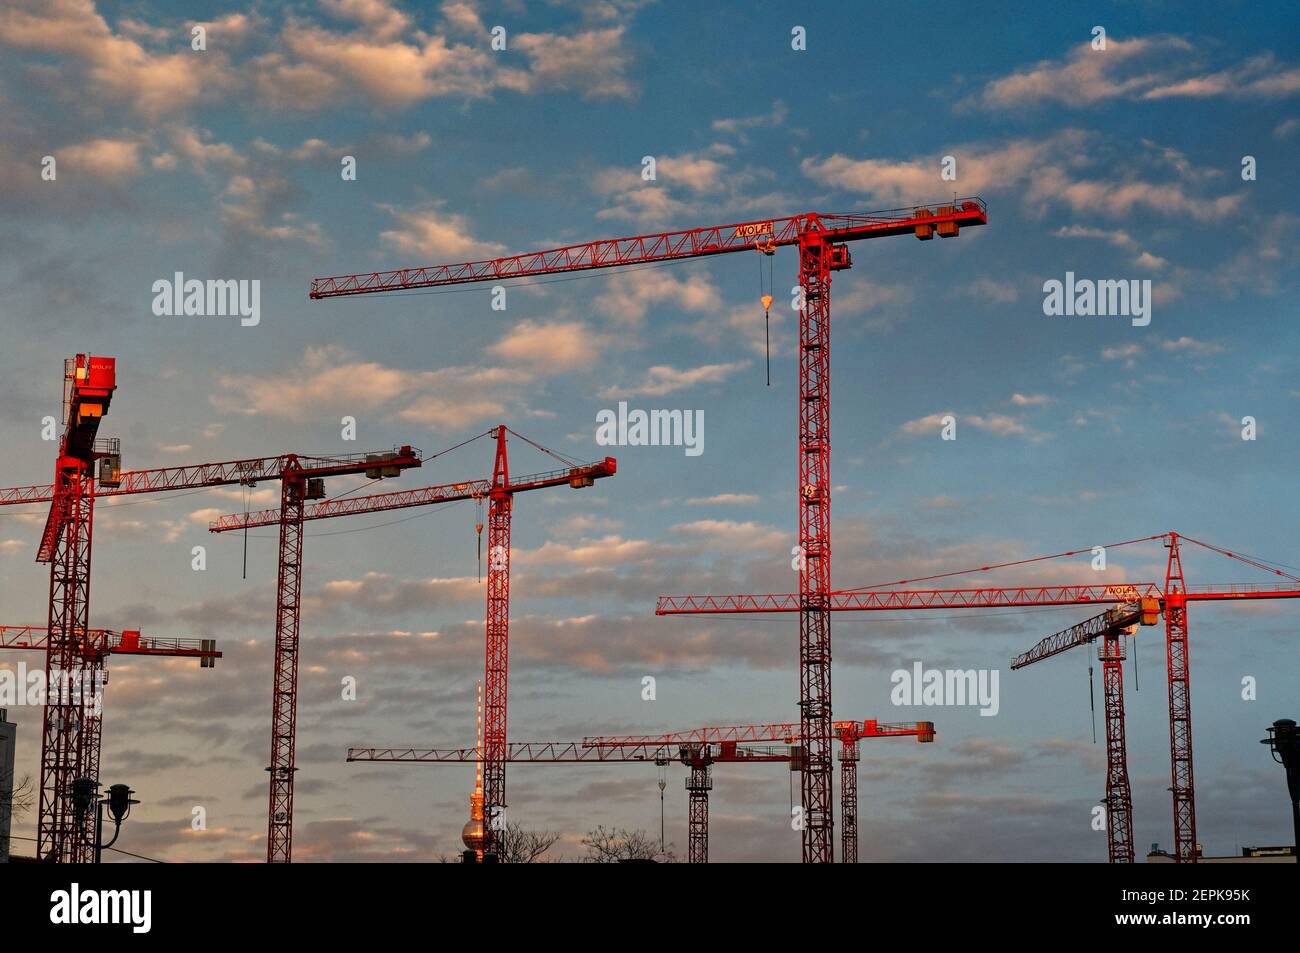 Constructions cranes seen against a sunset sky Stock Photo